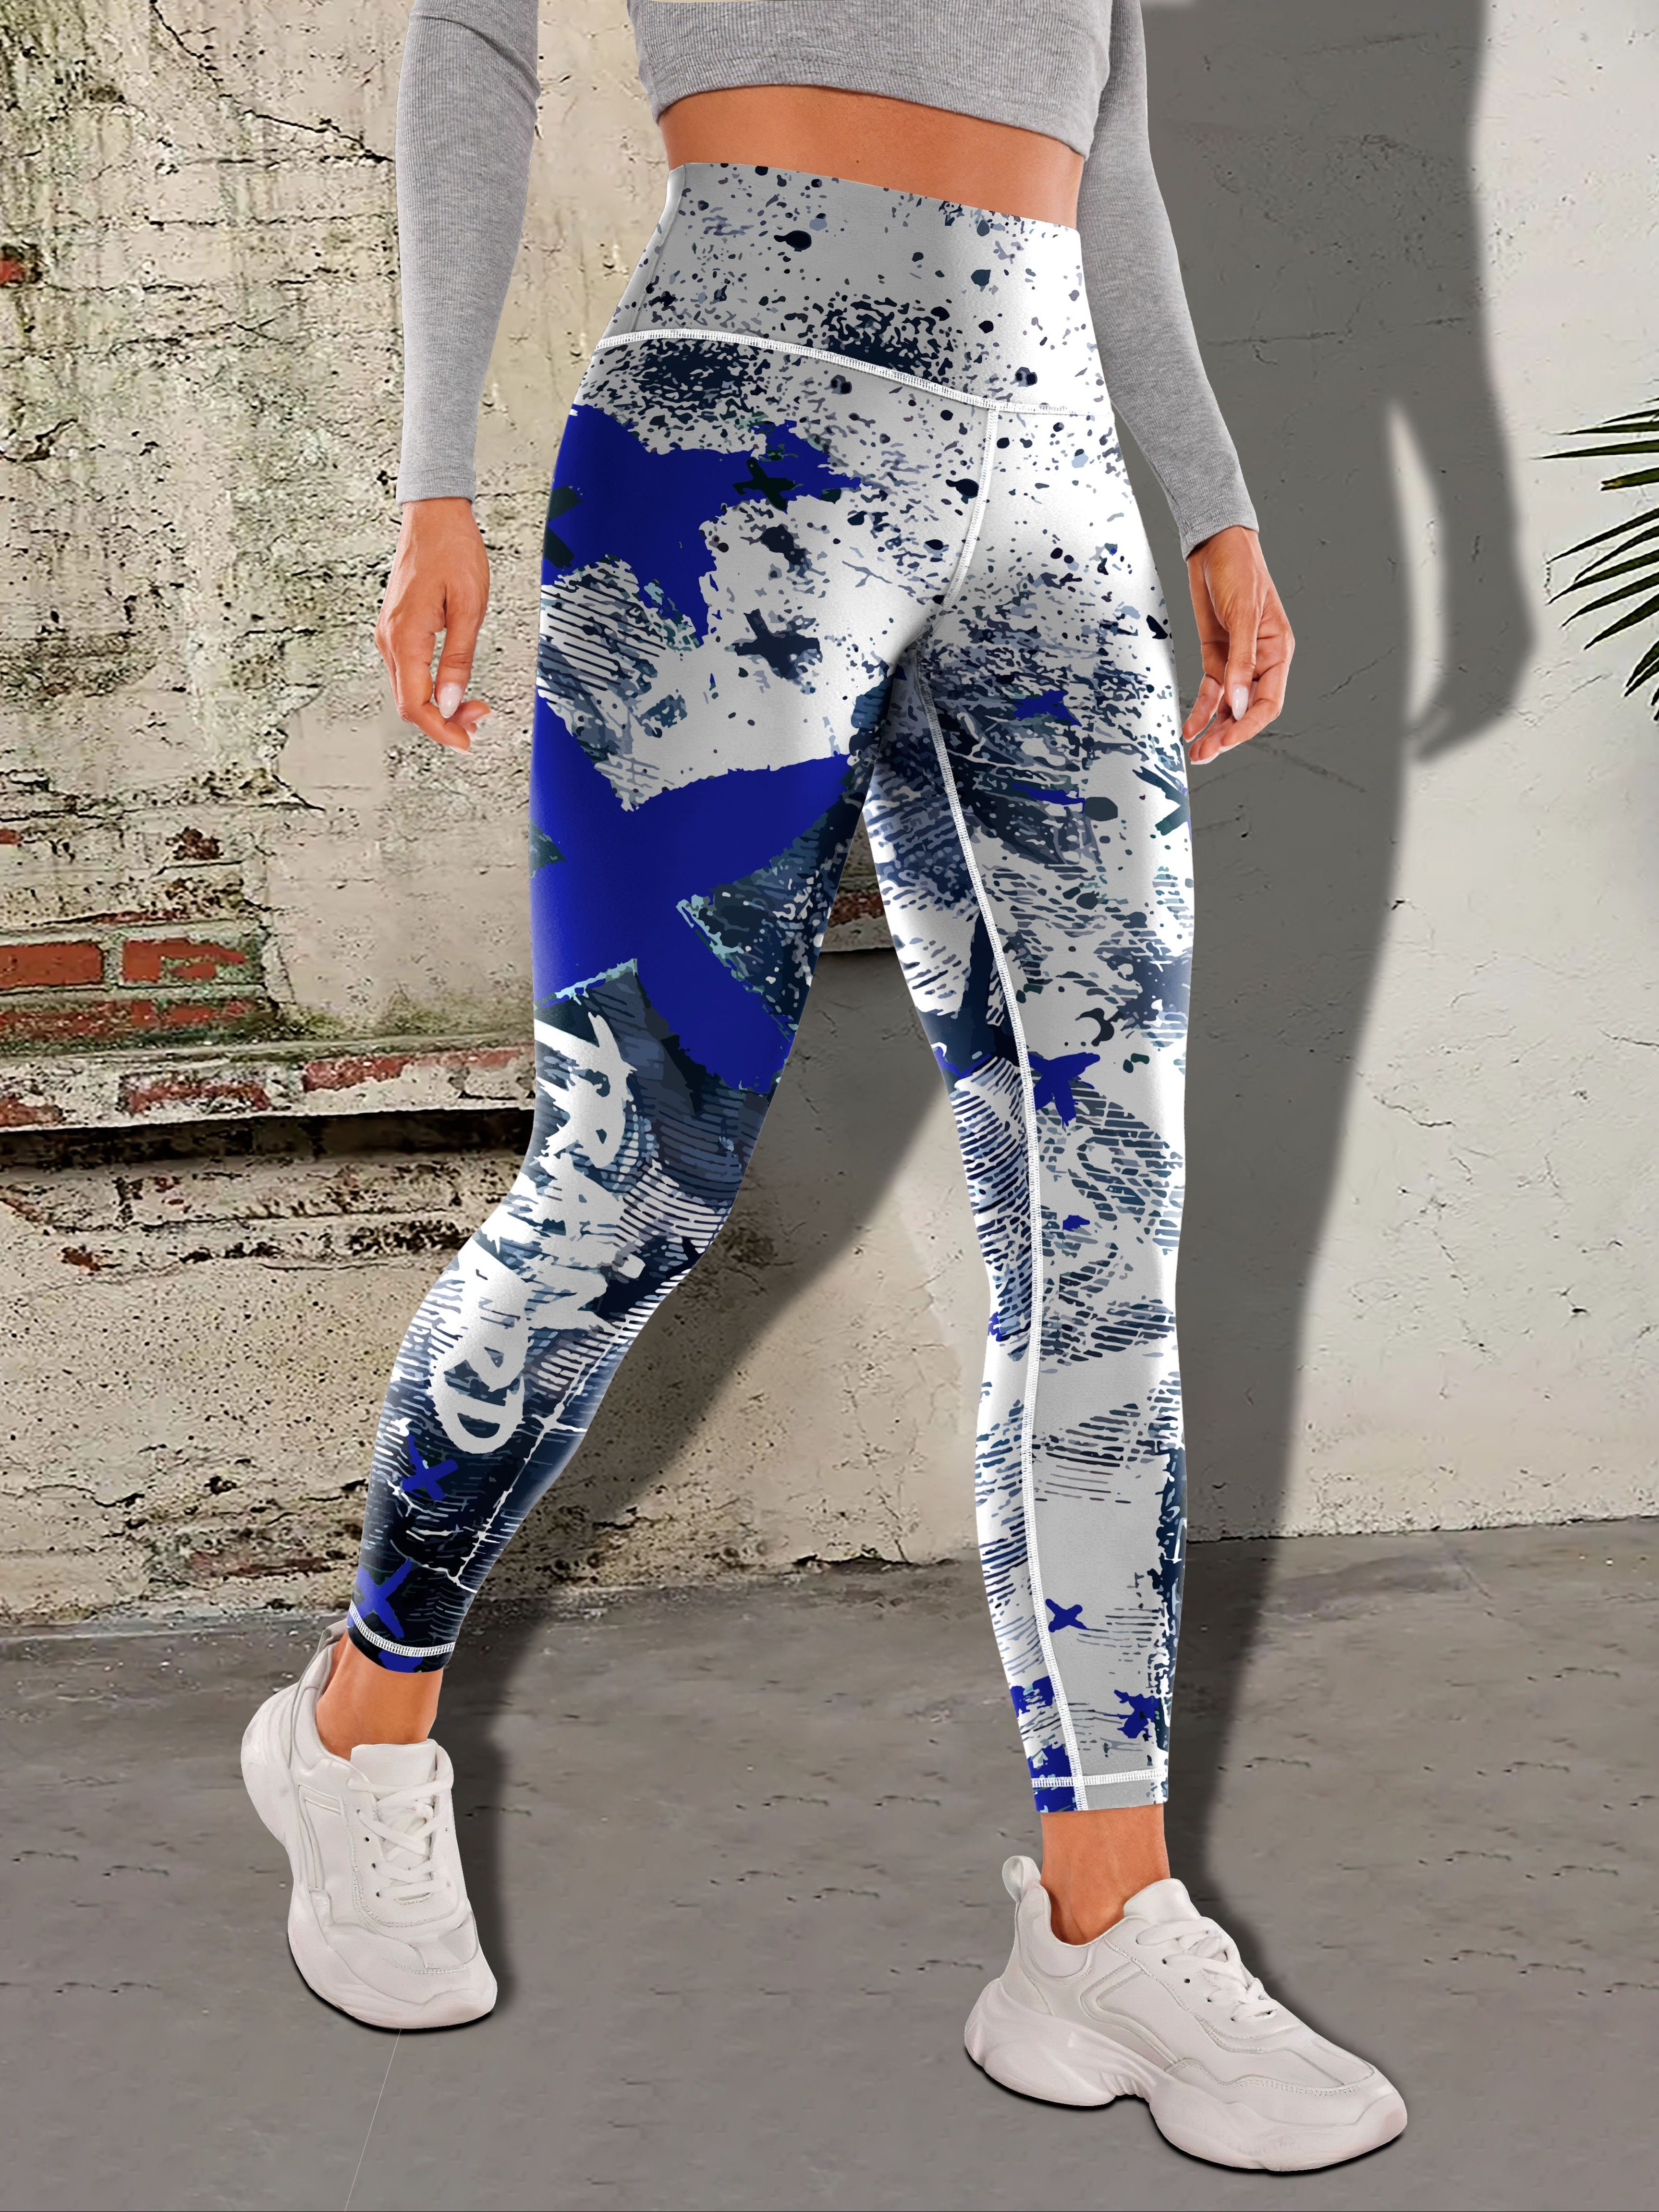 Waist Running Tights Pants Leggings Sports Printed Yoga Gradient Lift High Workout  Women Yoga Pants Pants Women Petite Yoga Yoga Compression Pants for Women  with Pockets 